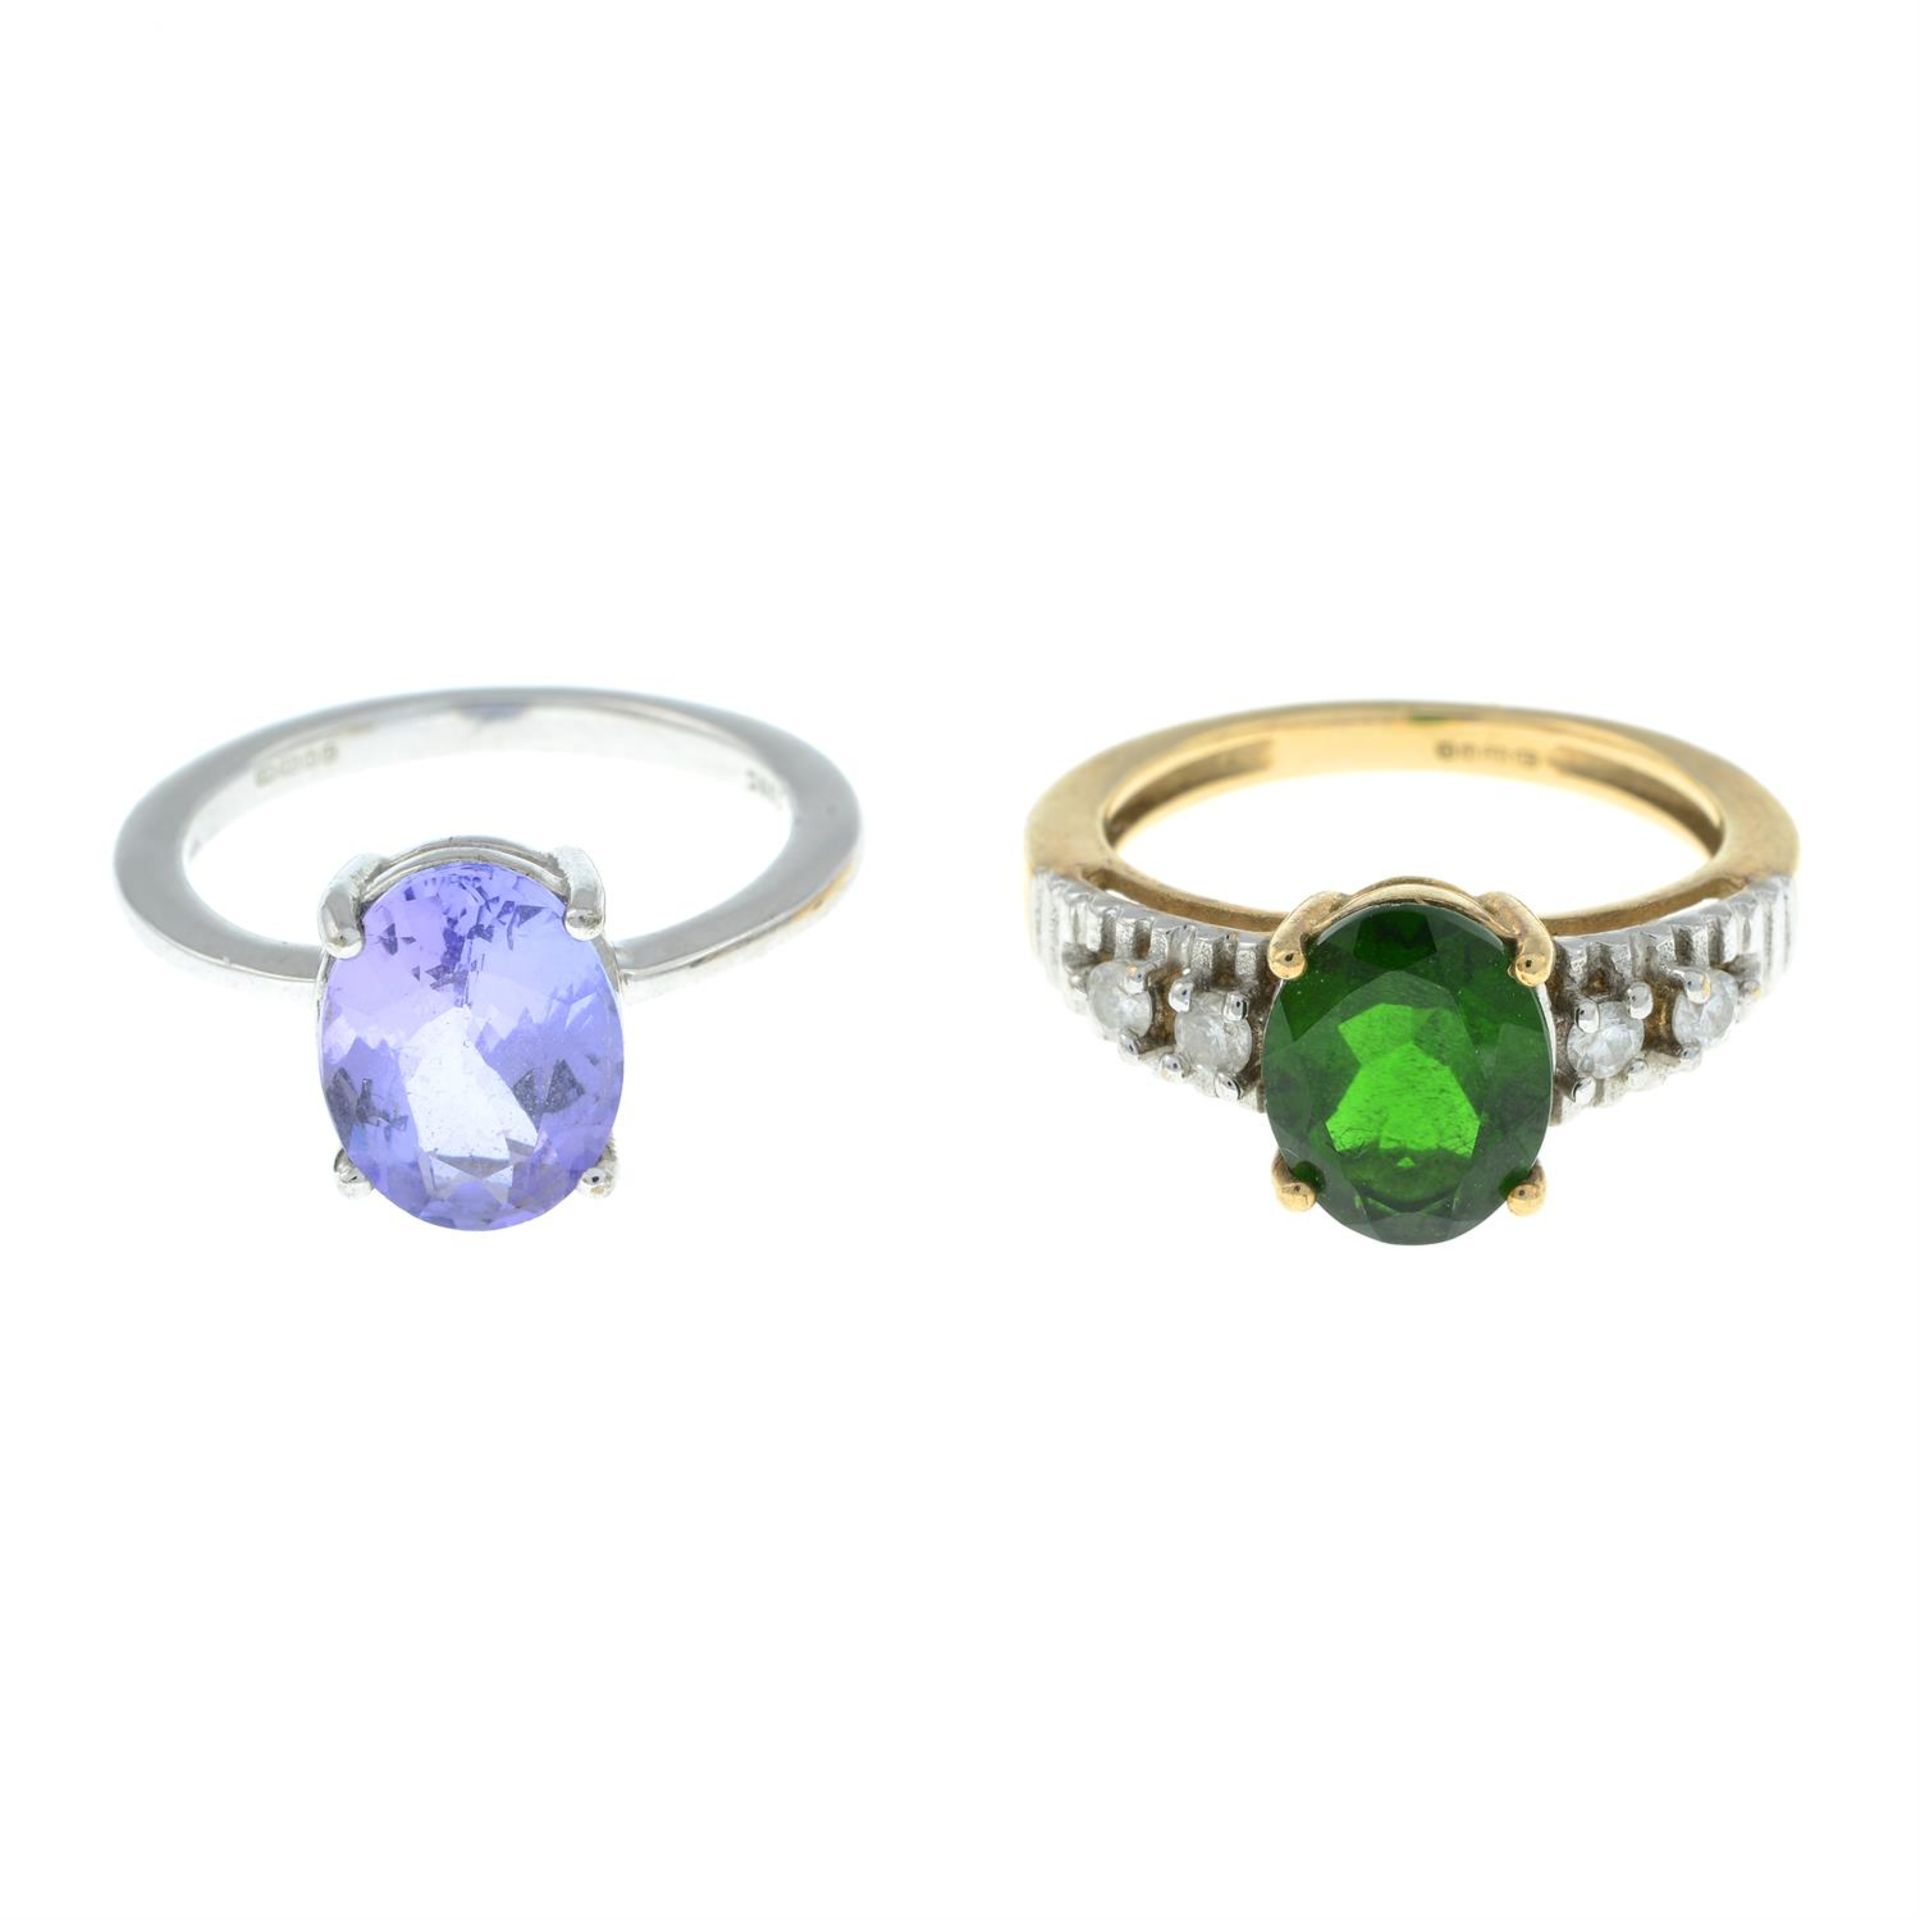 Two 9ct gold gem rings